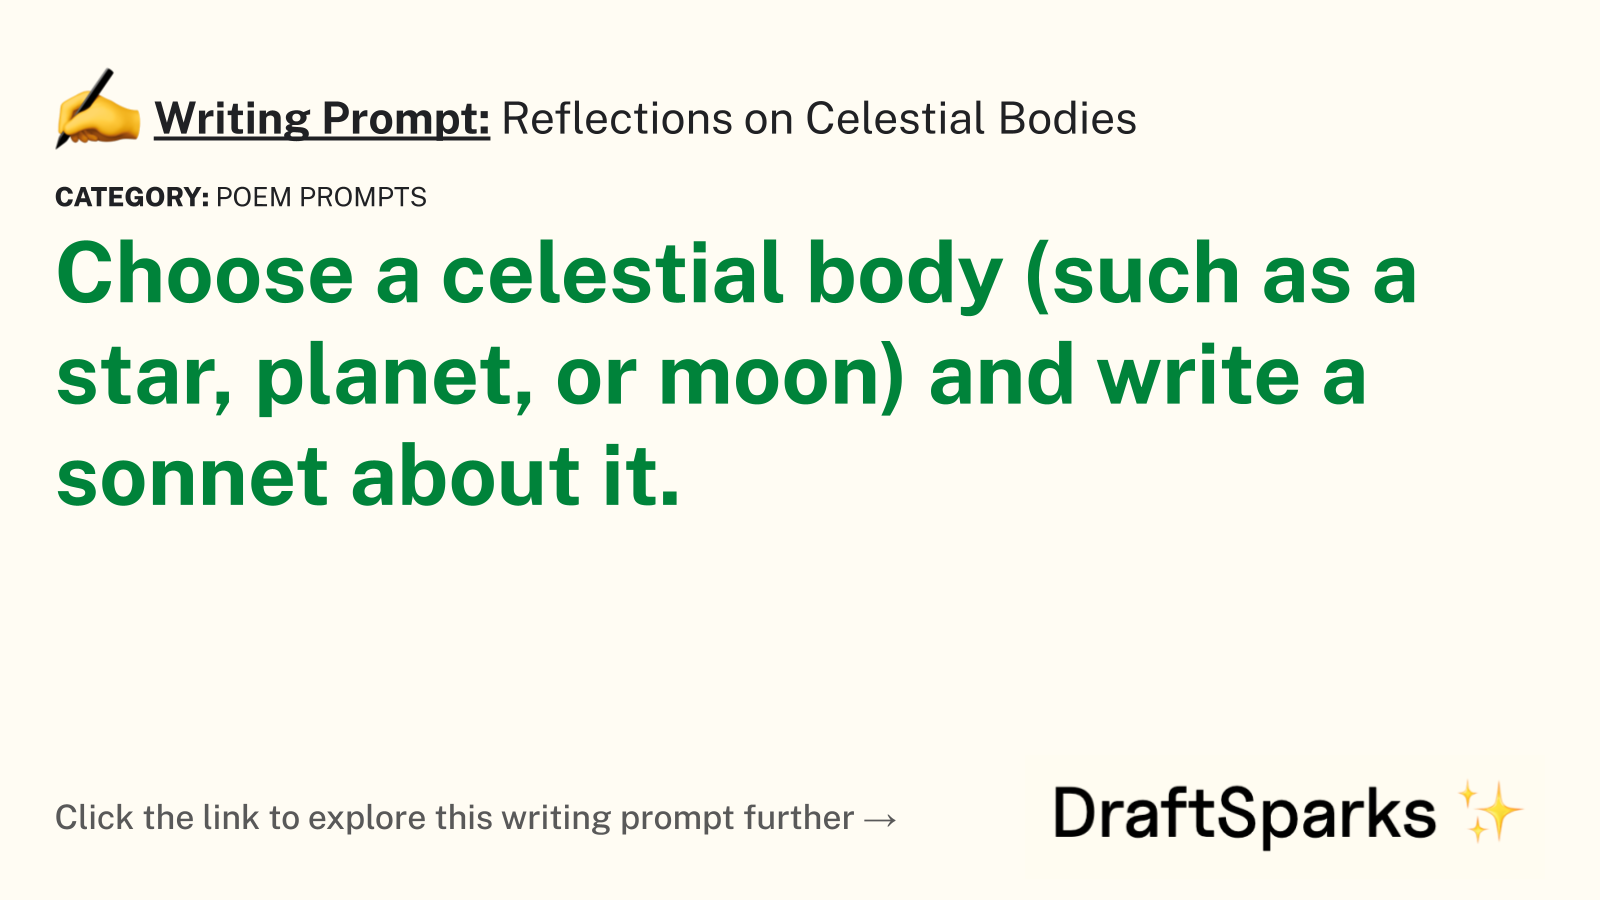 Reflections on Celestial Bodies